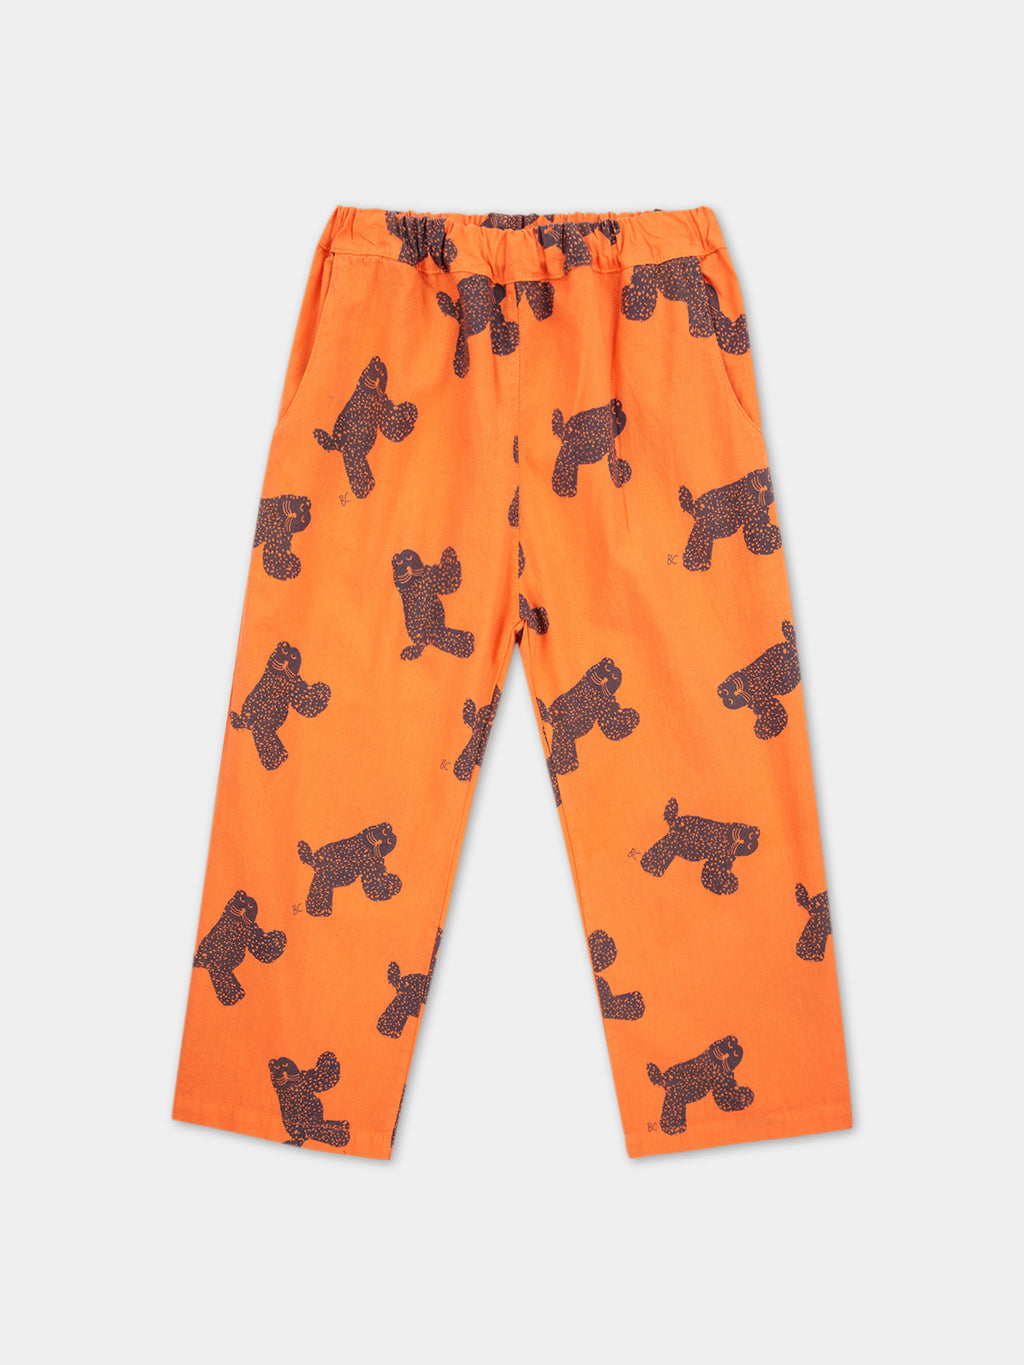 Orange trousers for kids with all-over cheetah pattern